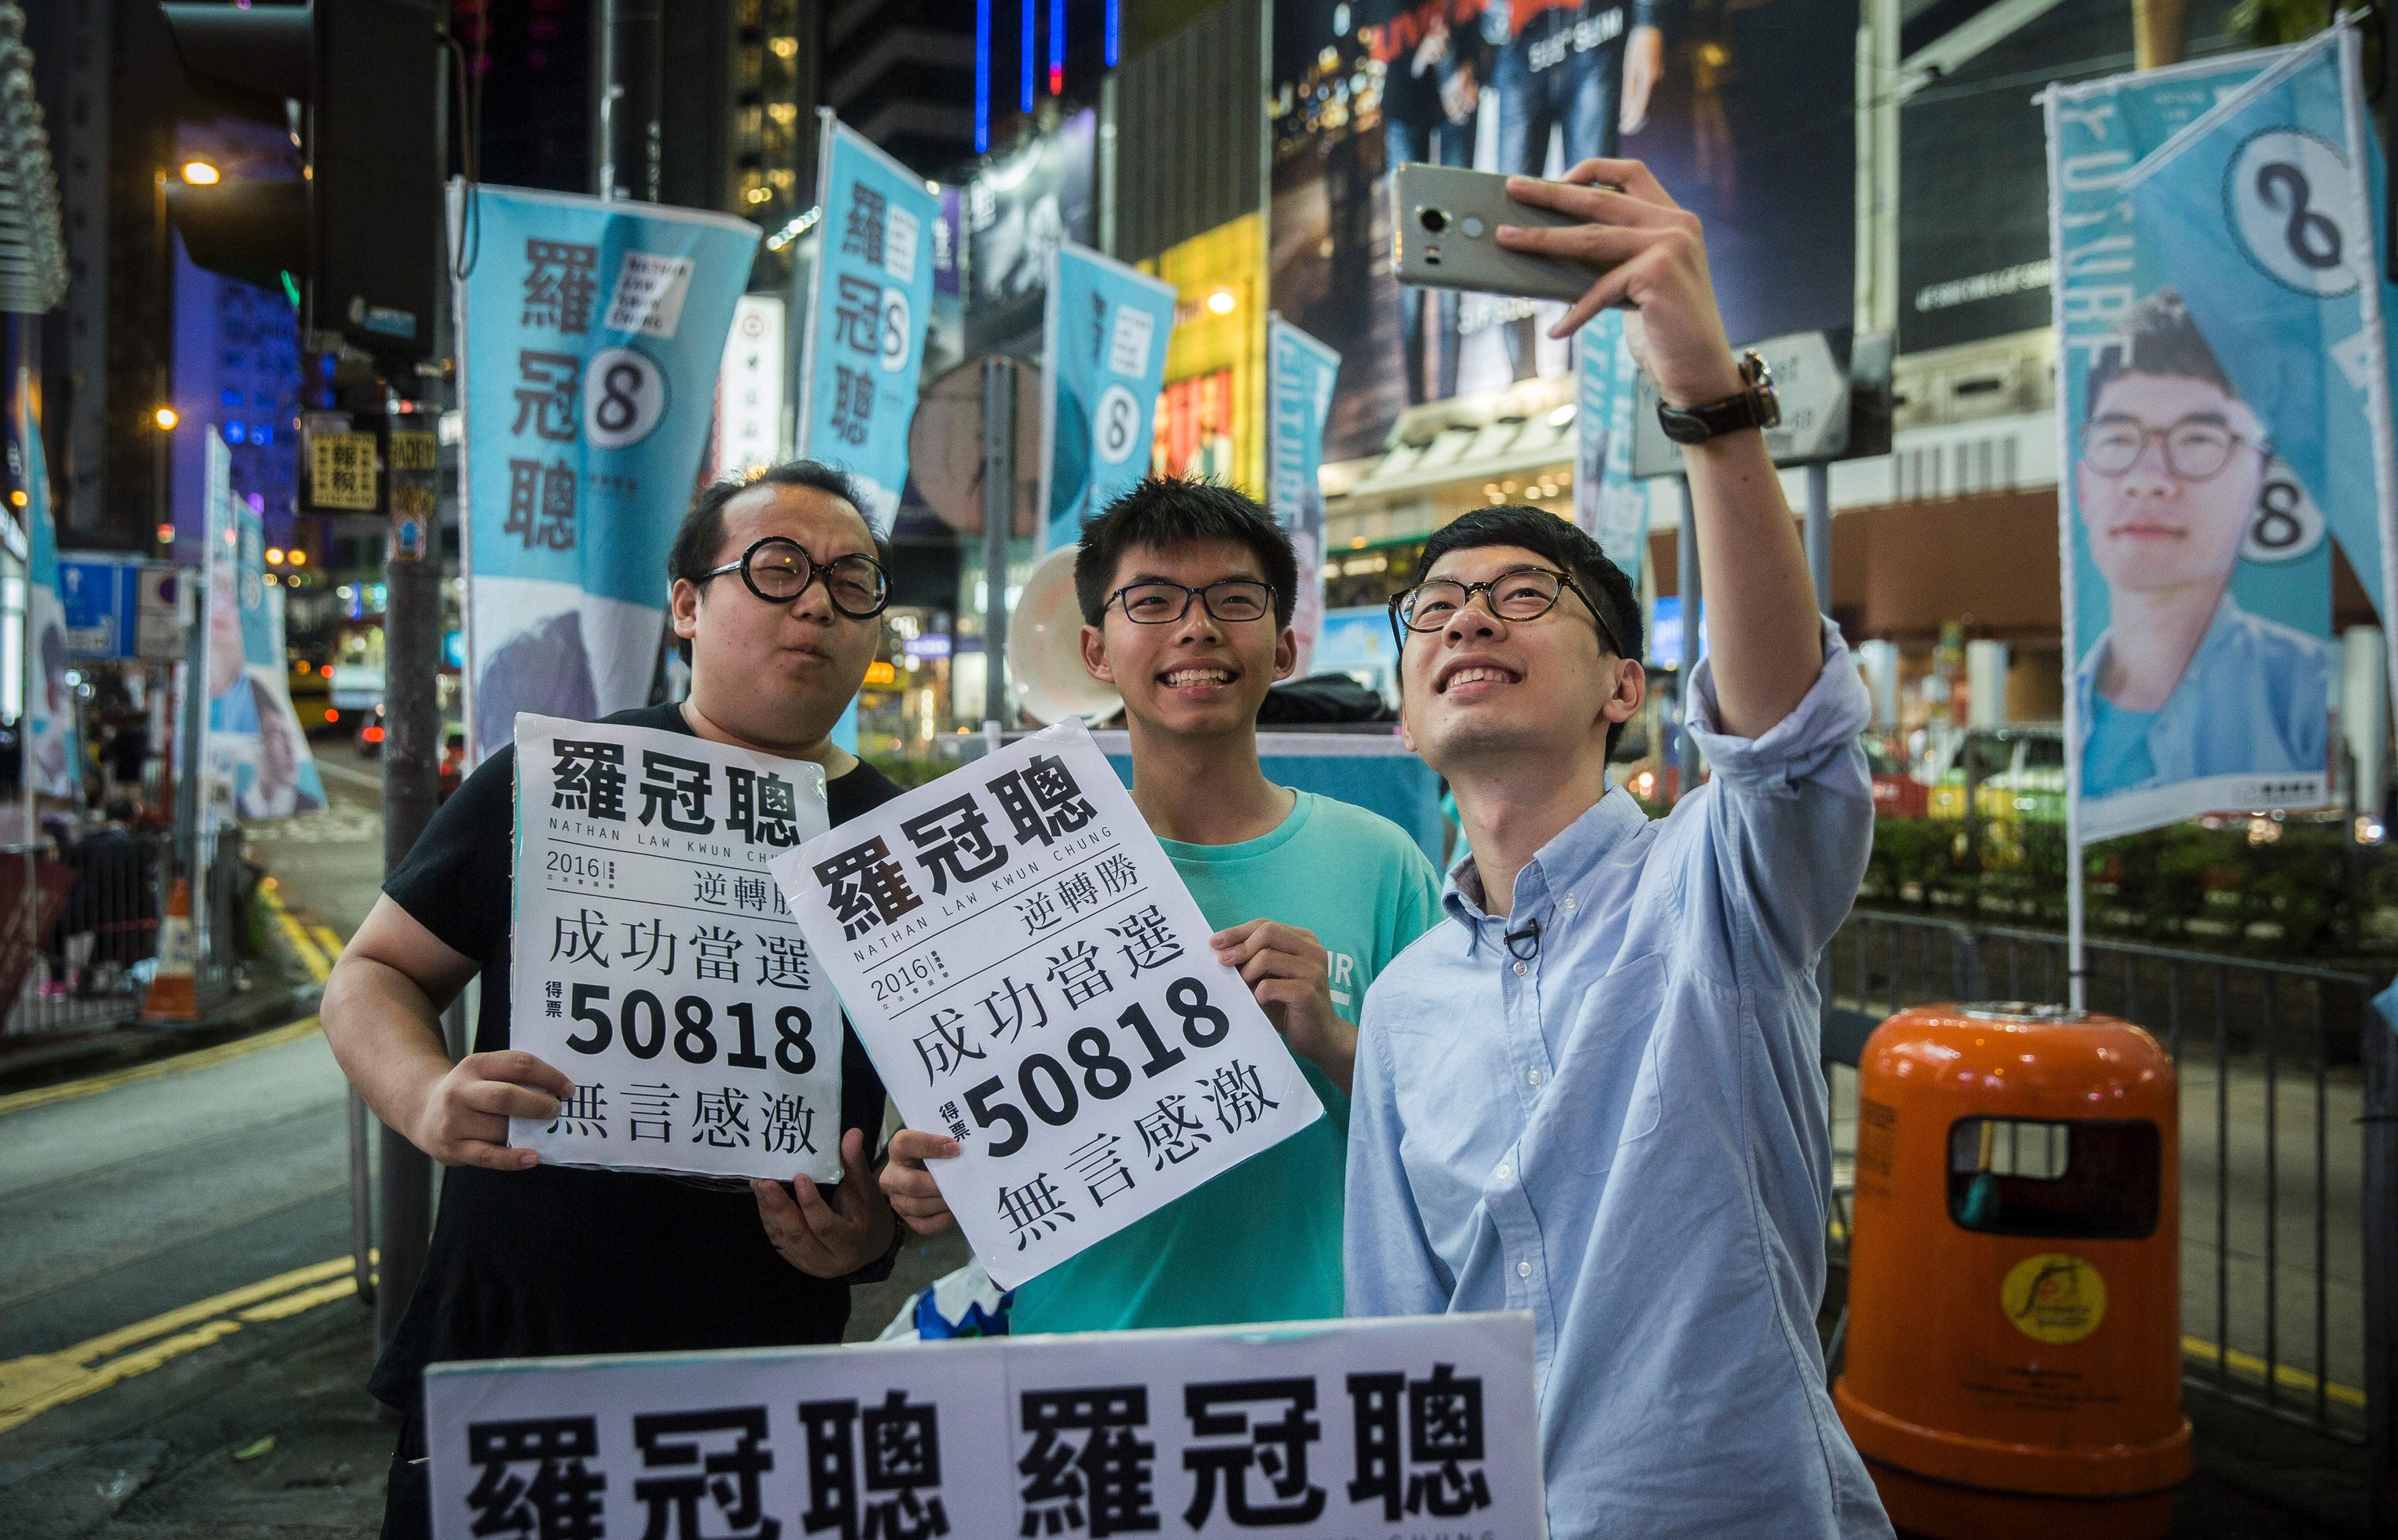 Nathan Law, right, and Joshua Wong, center, take a selfie at a rally in Causeway Bay in Hong Kong on Sept. 5, 2016, following Law's win in the Legislative Council elections (Isaac Lawrence—AFP/Getty Images)